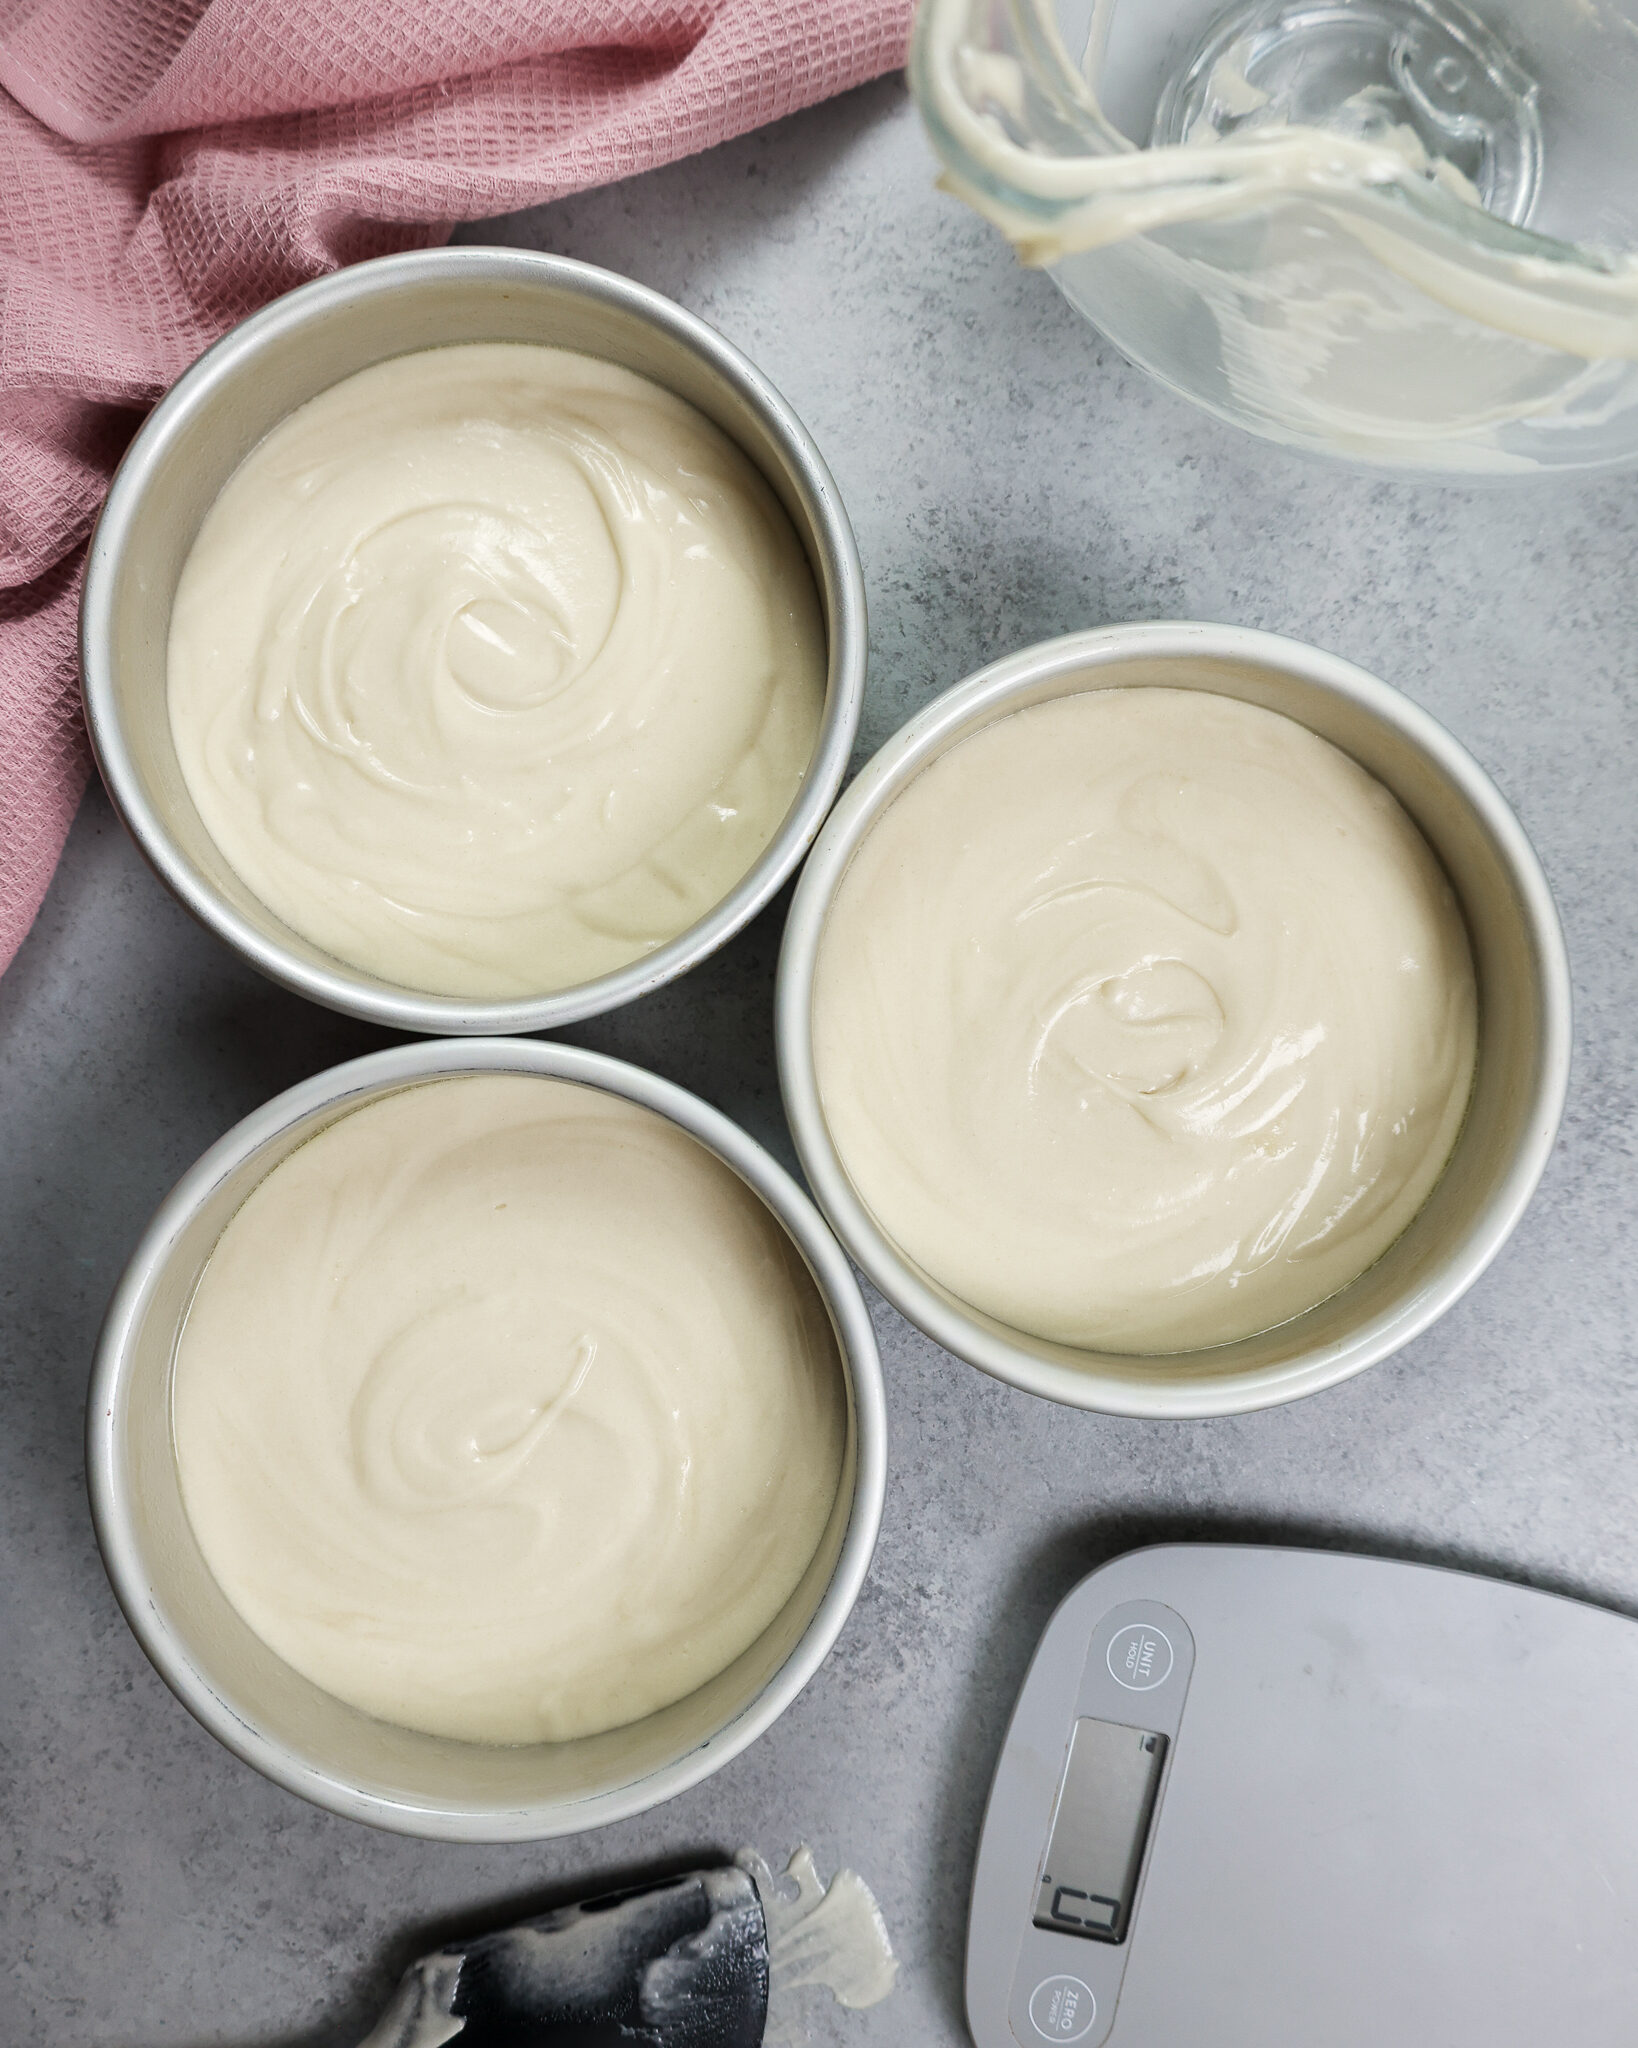 image of vanilla cake batter that's been poured into 6-inch cake pans and is ready to be baked